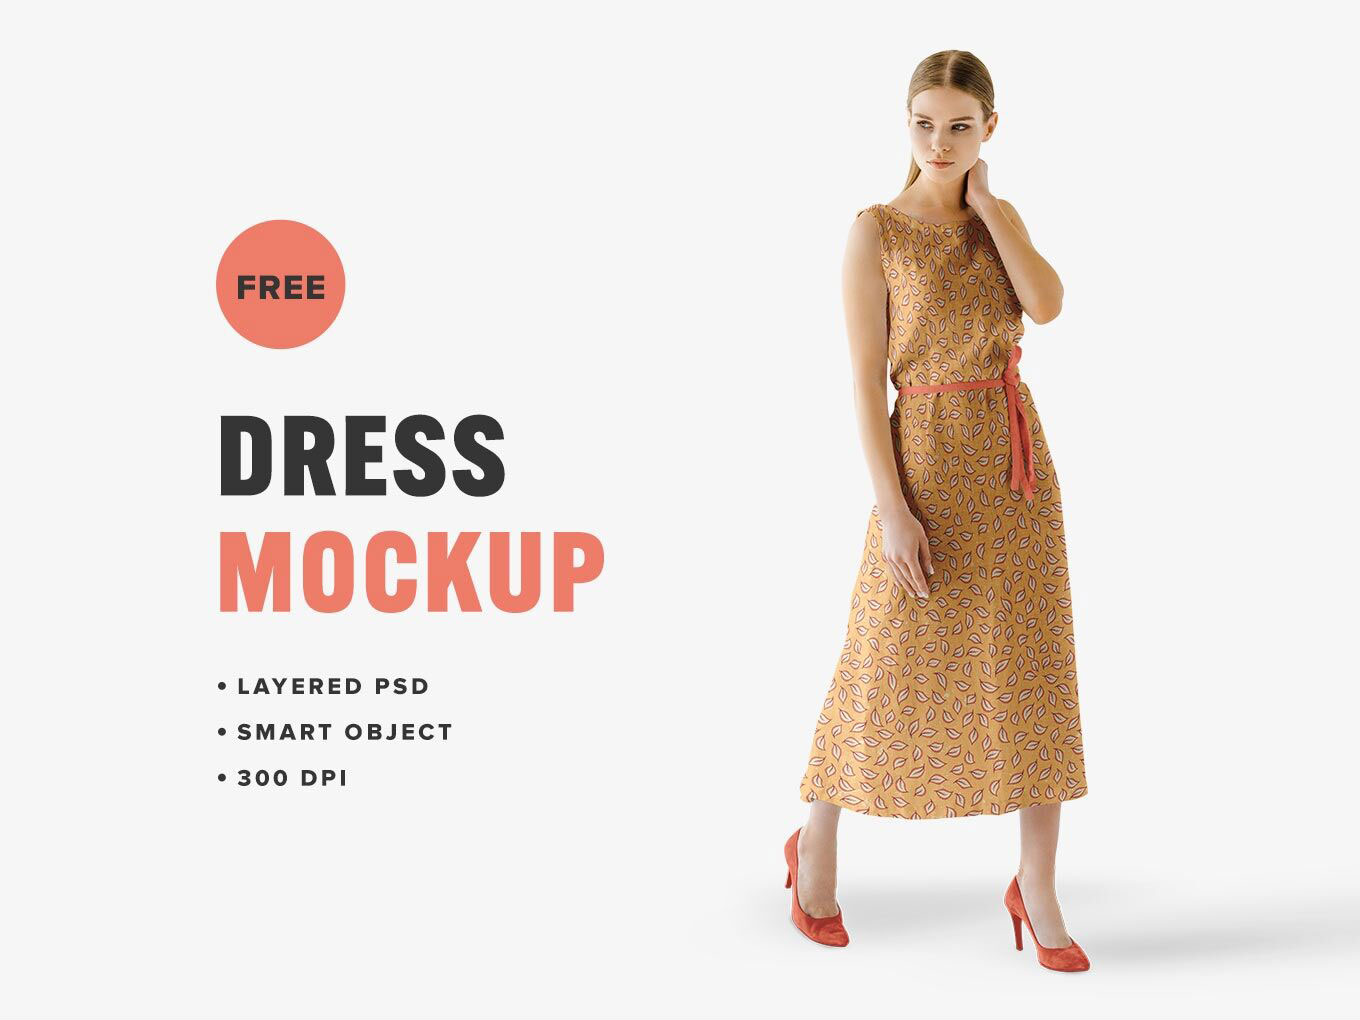 Girl Wearing Summer Dress with Belt and High Heels Mockup FREE PSD